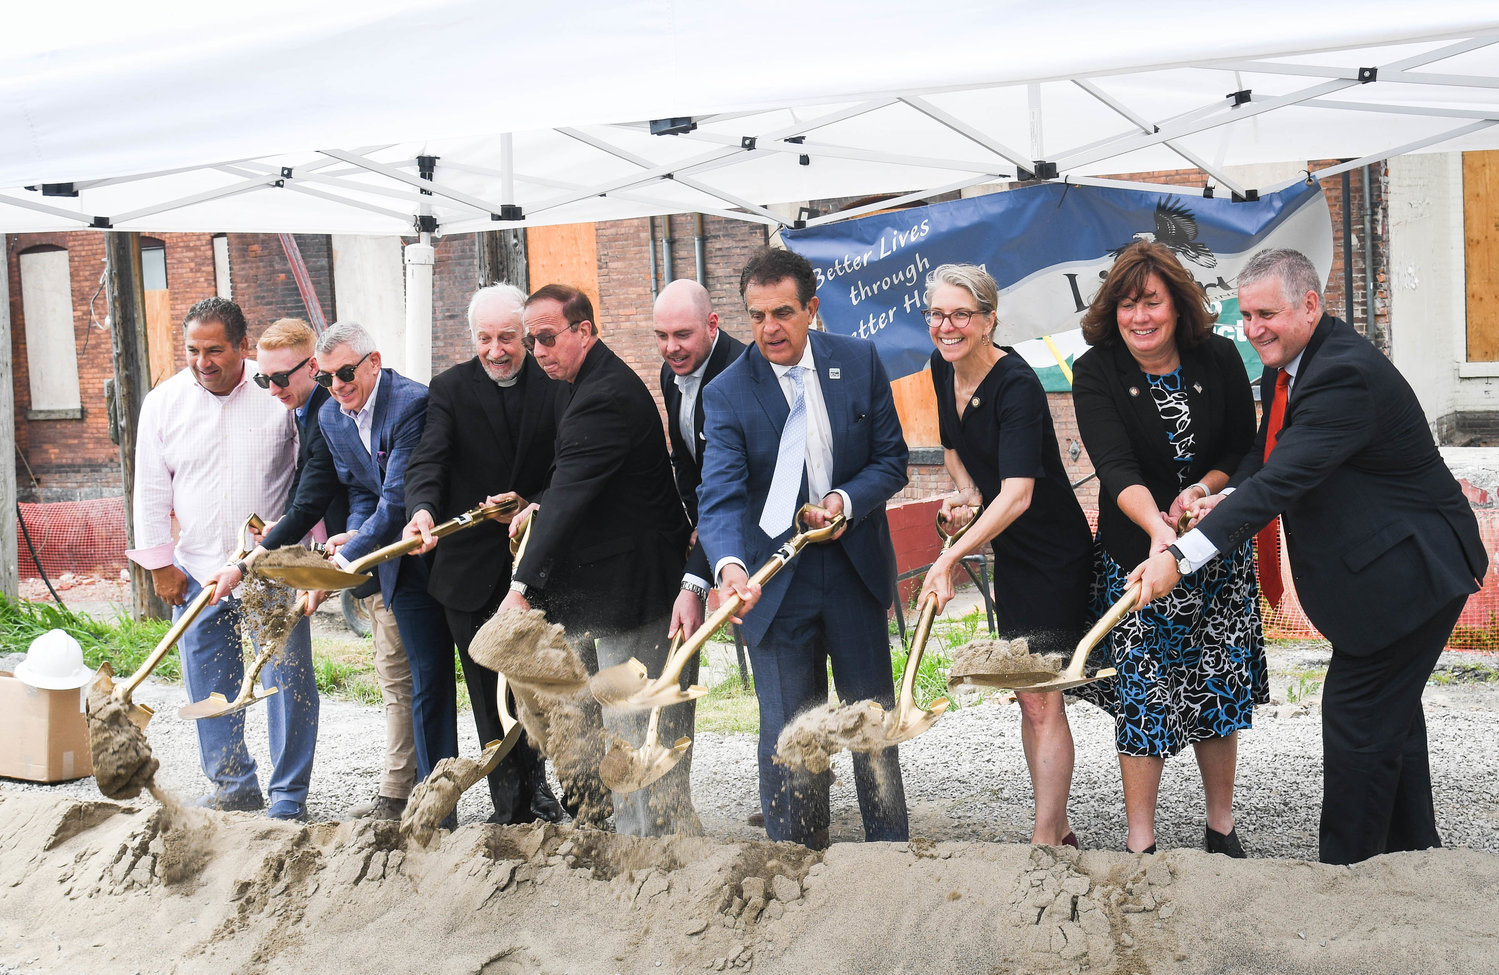 New York State Homes and Community Renewal, Liberty Affordable Housing elected officials and community leaders break ground to celebrate the start of the $67 million project to rehabilitate and modernize Utica's historical Olbiston Apartments.